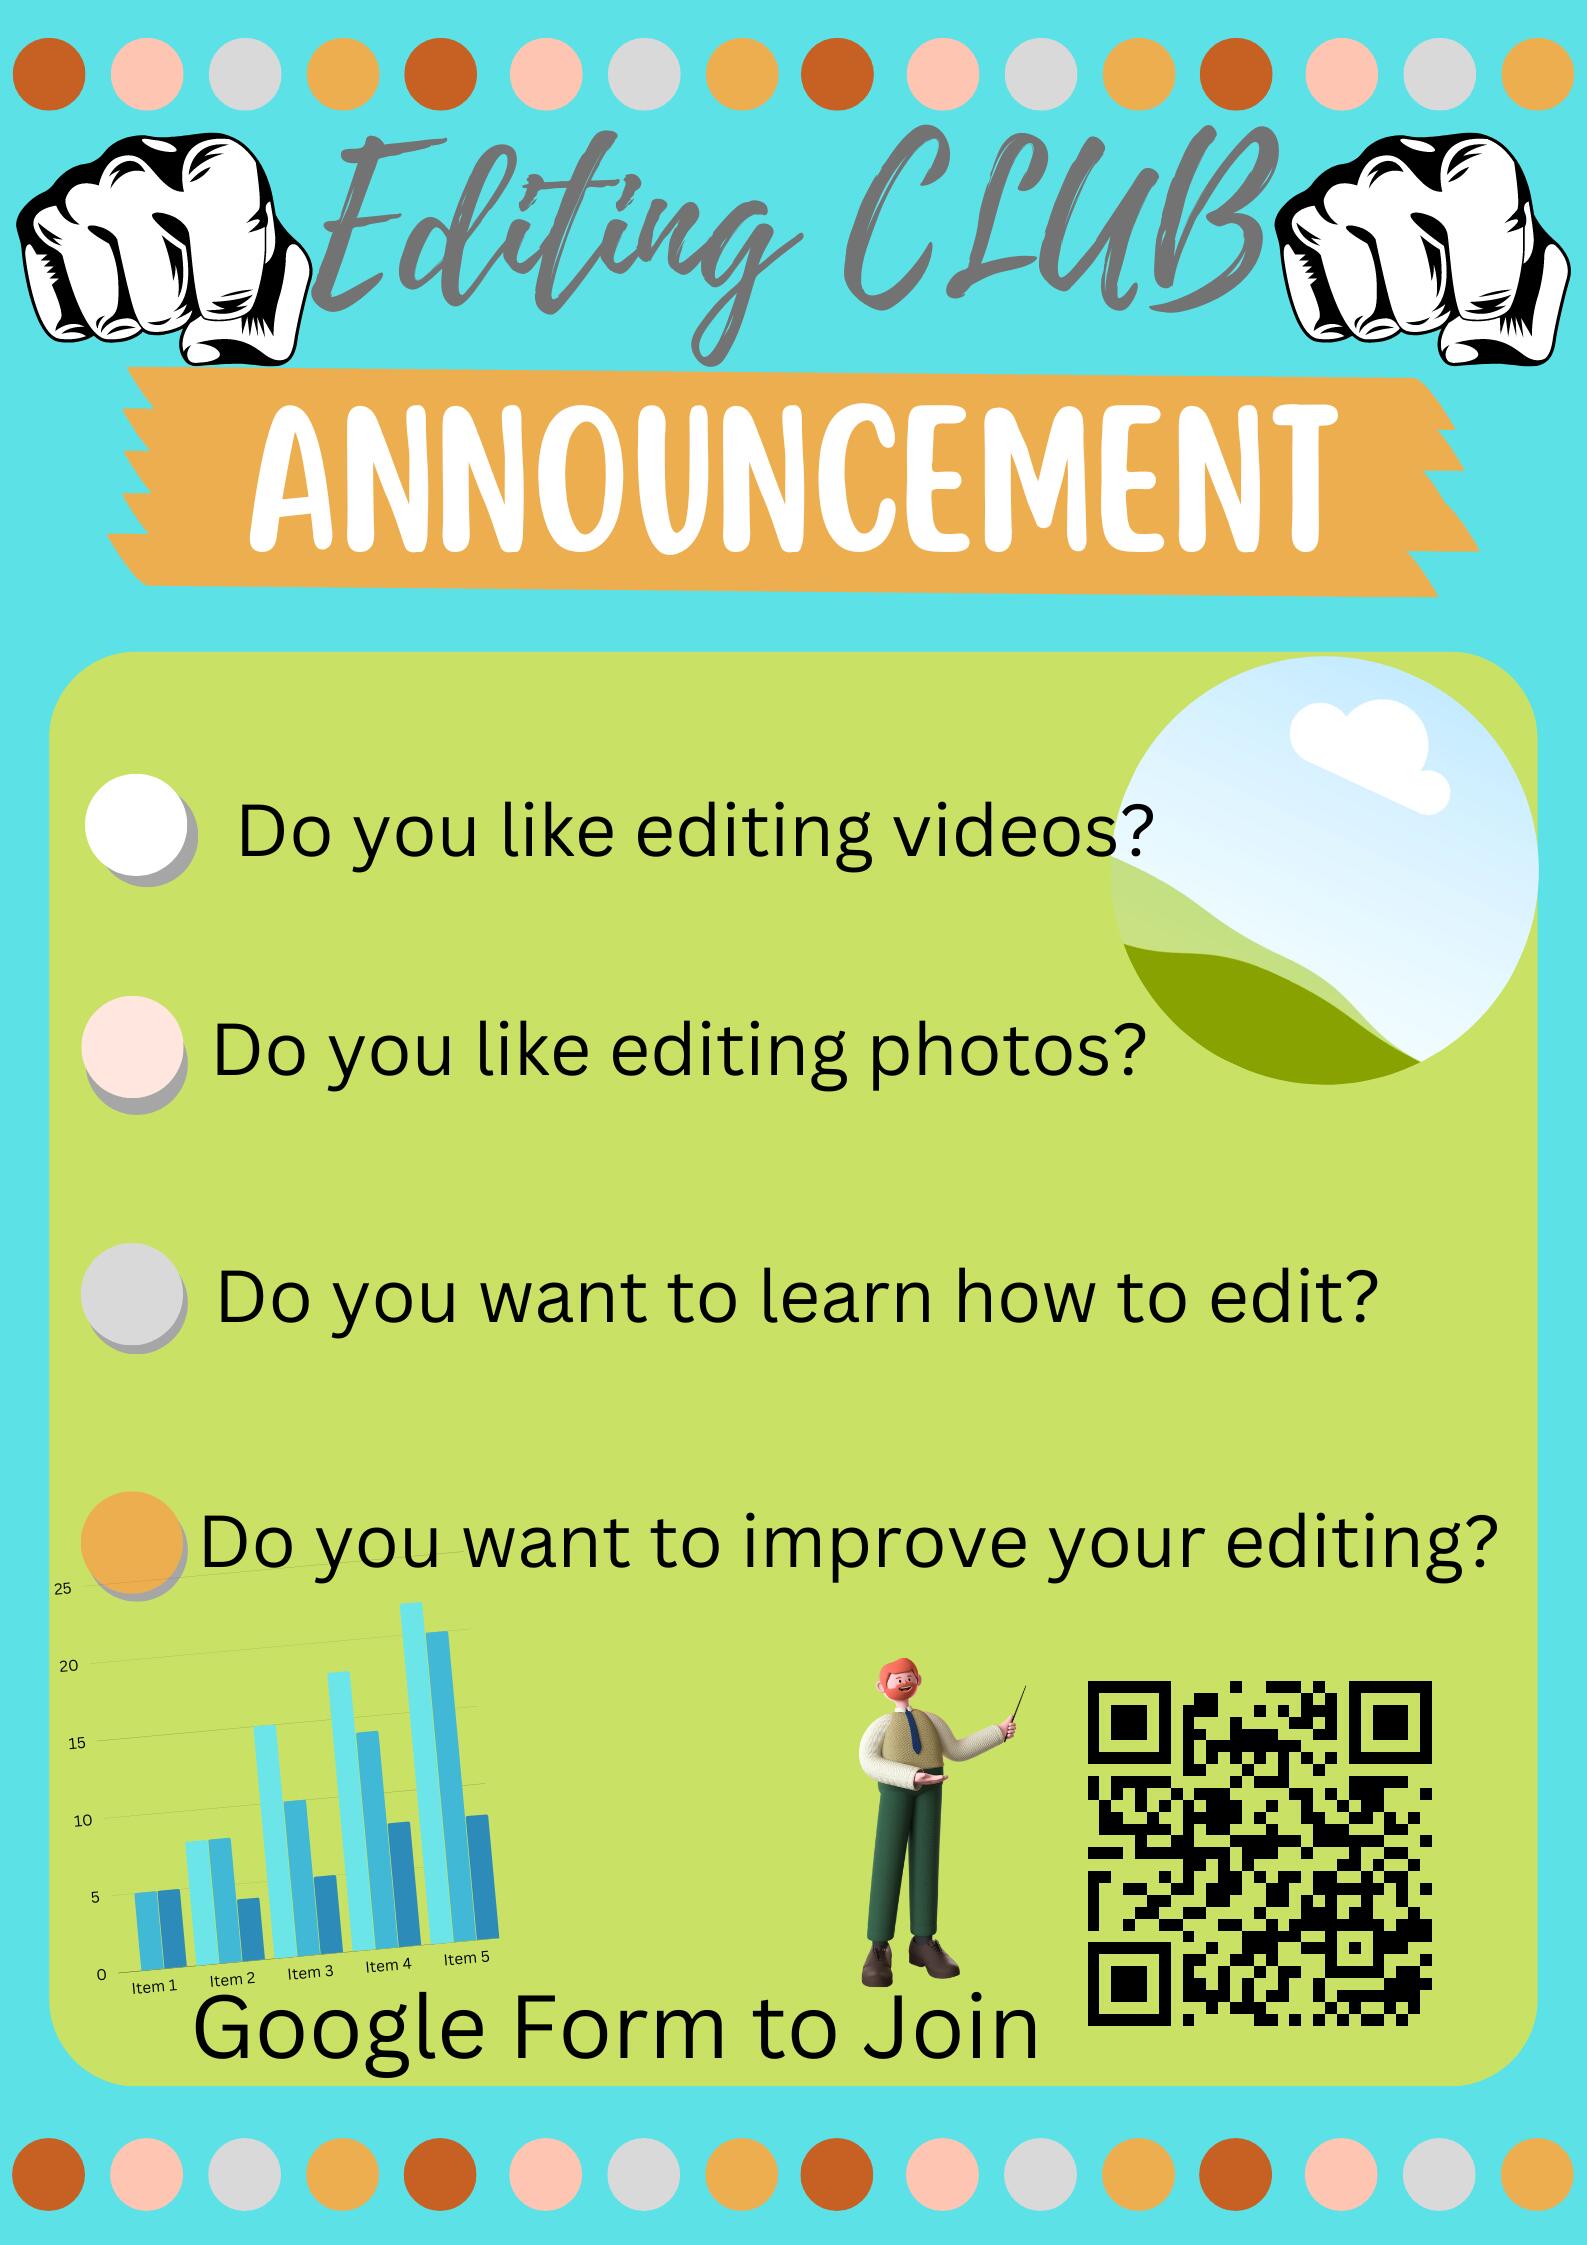 Editing Club Announcement Information